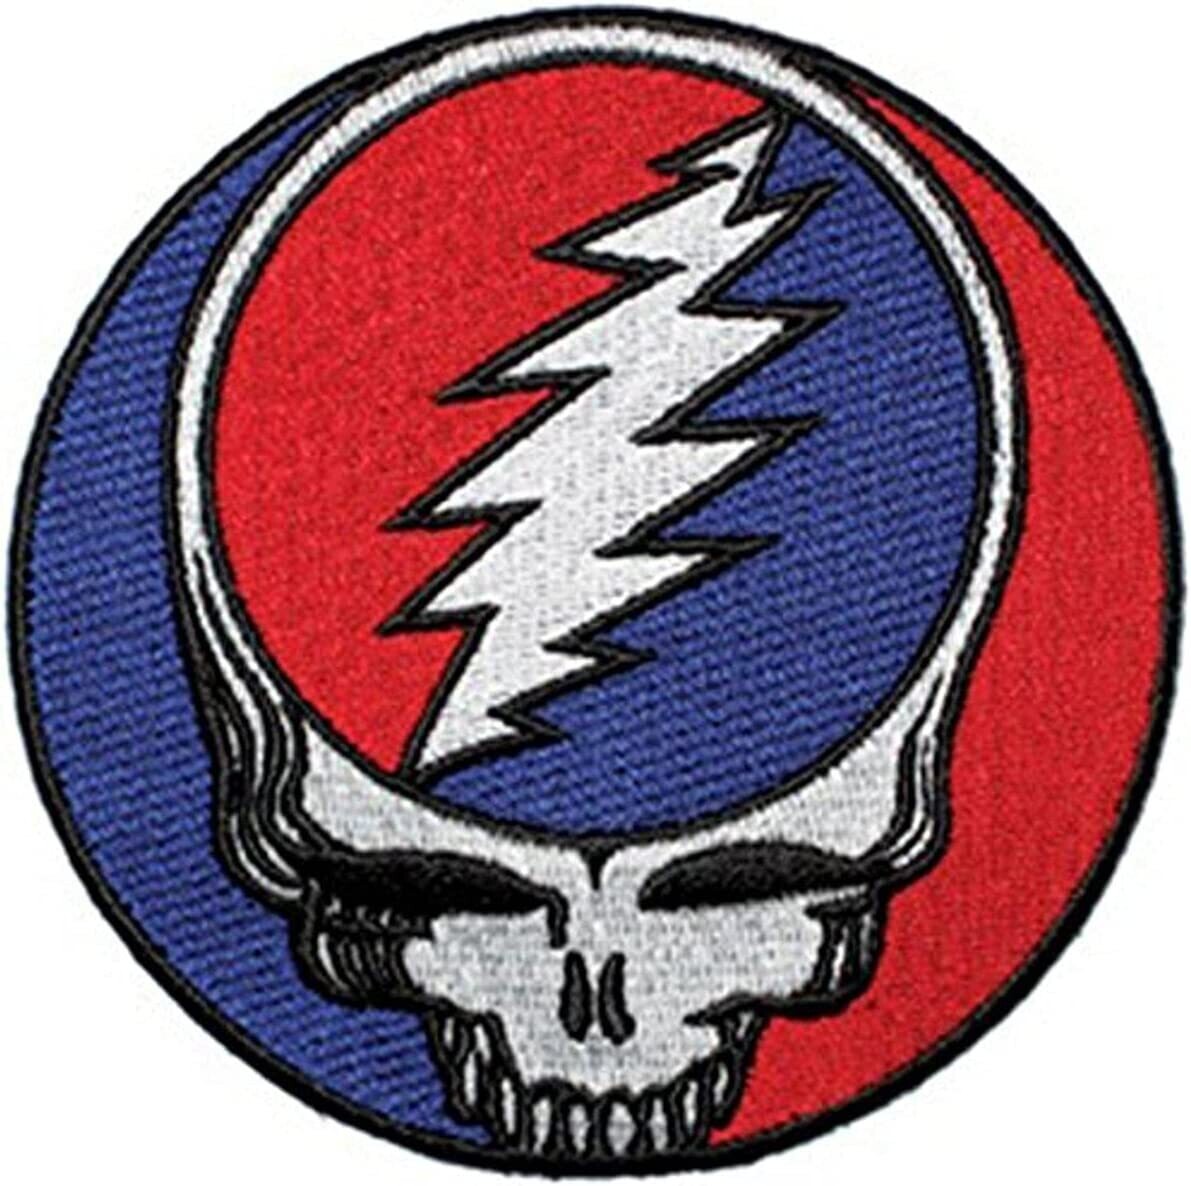 5"D Grateful Dead "Steal Your Face" Embroidered Iron-On Patch